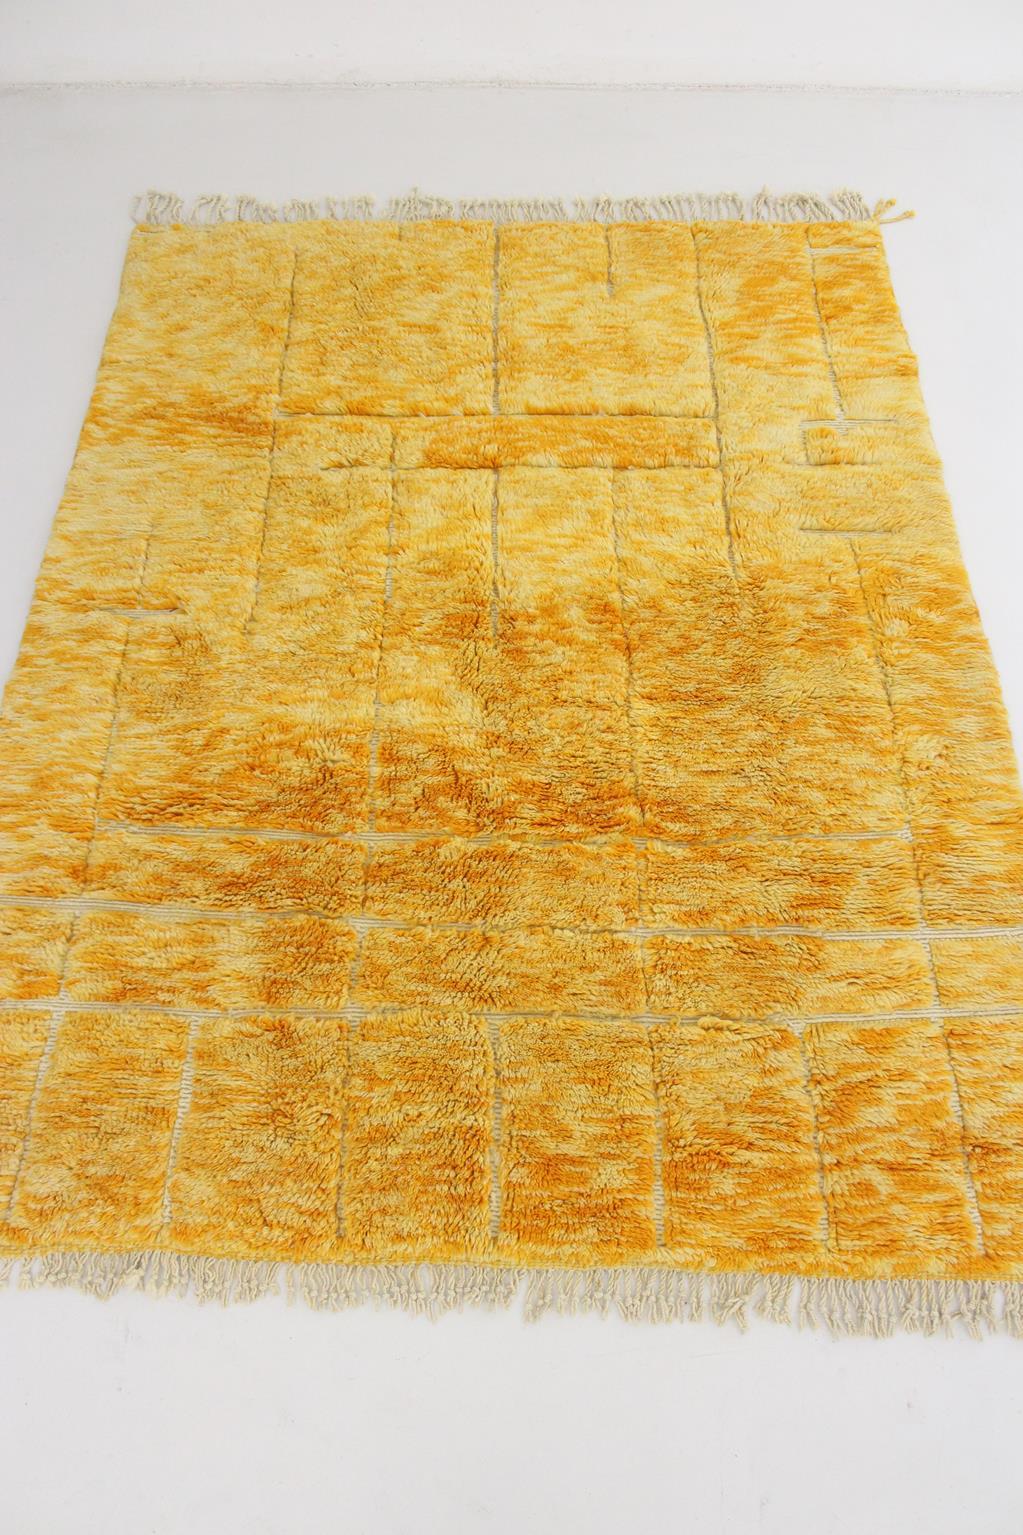 I sourced this modern-style, original Mrirt rug in the area of Khenifra, Atlas Mountains, Morocco. Groups of women there still weave by hand on traditional, vertical looms to make these new rugs.

Colors are different tones of a bright, warm yellow